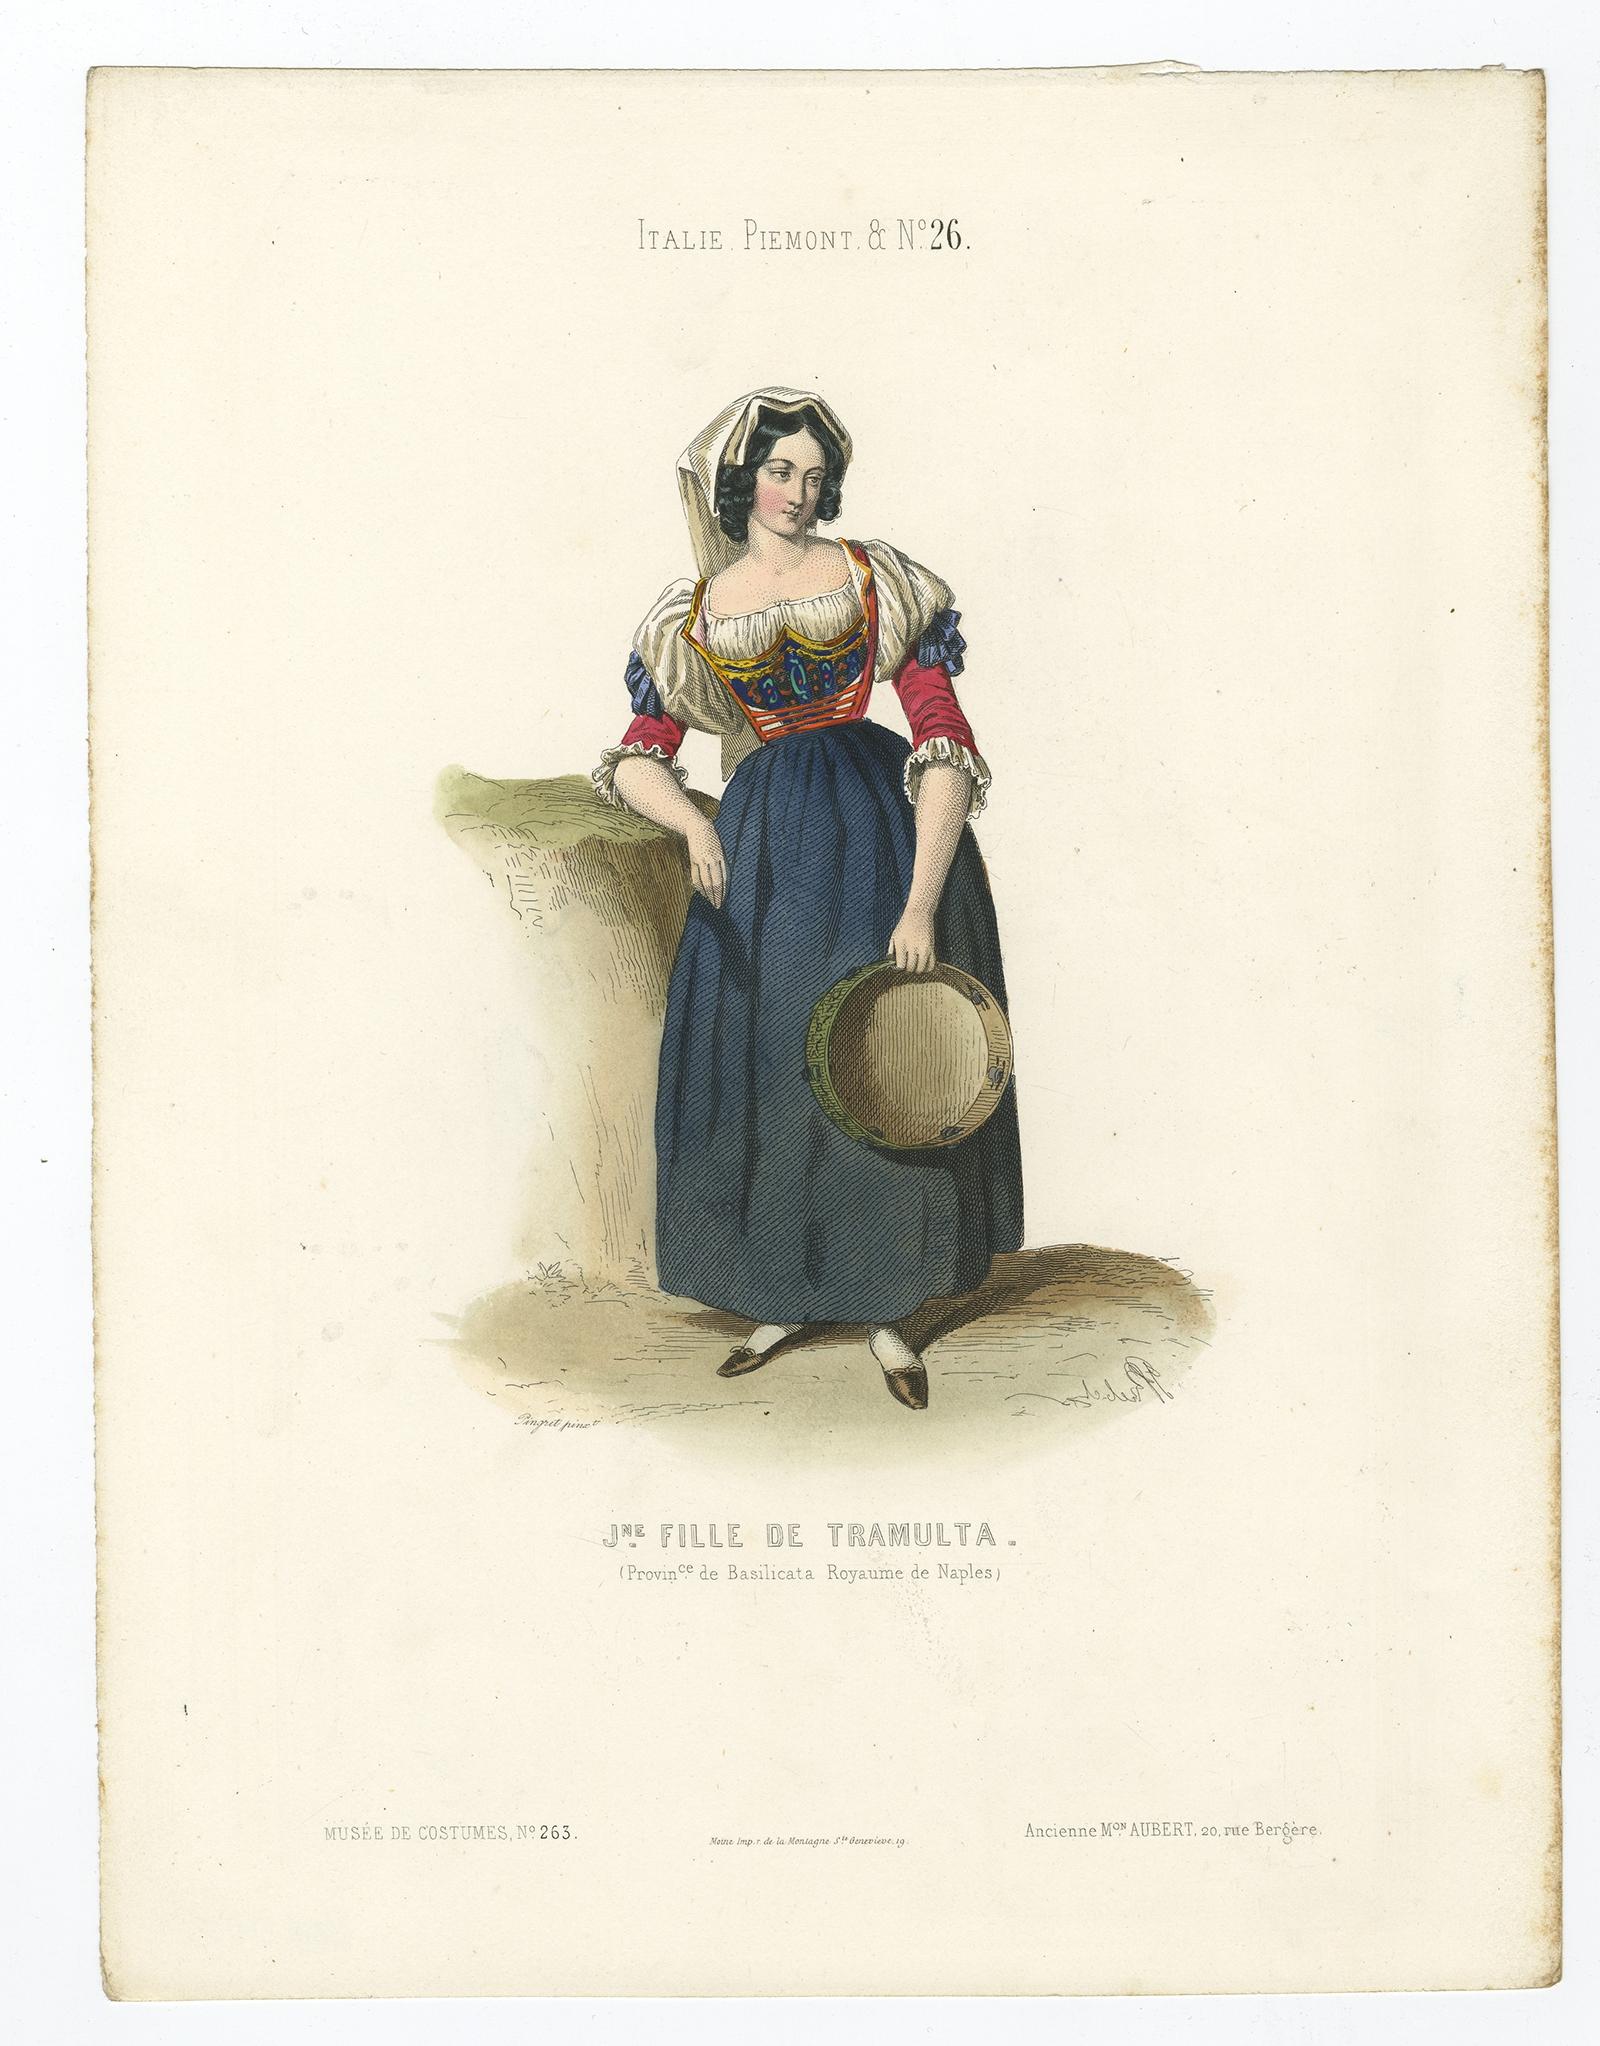 Antique costume print titled 'Jeune Fille de Tramulta (Province de Basilicata Royaume de Naples)'. 

Old print depicting a young lady from Tramulta, Italy. This print originates from 'Costumes Moderne (Musée de Costumes). 

Artists and